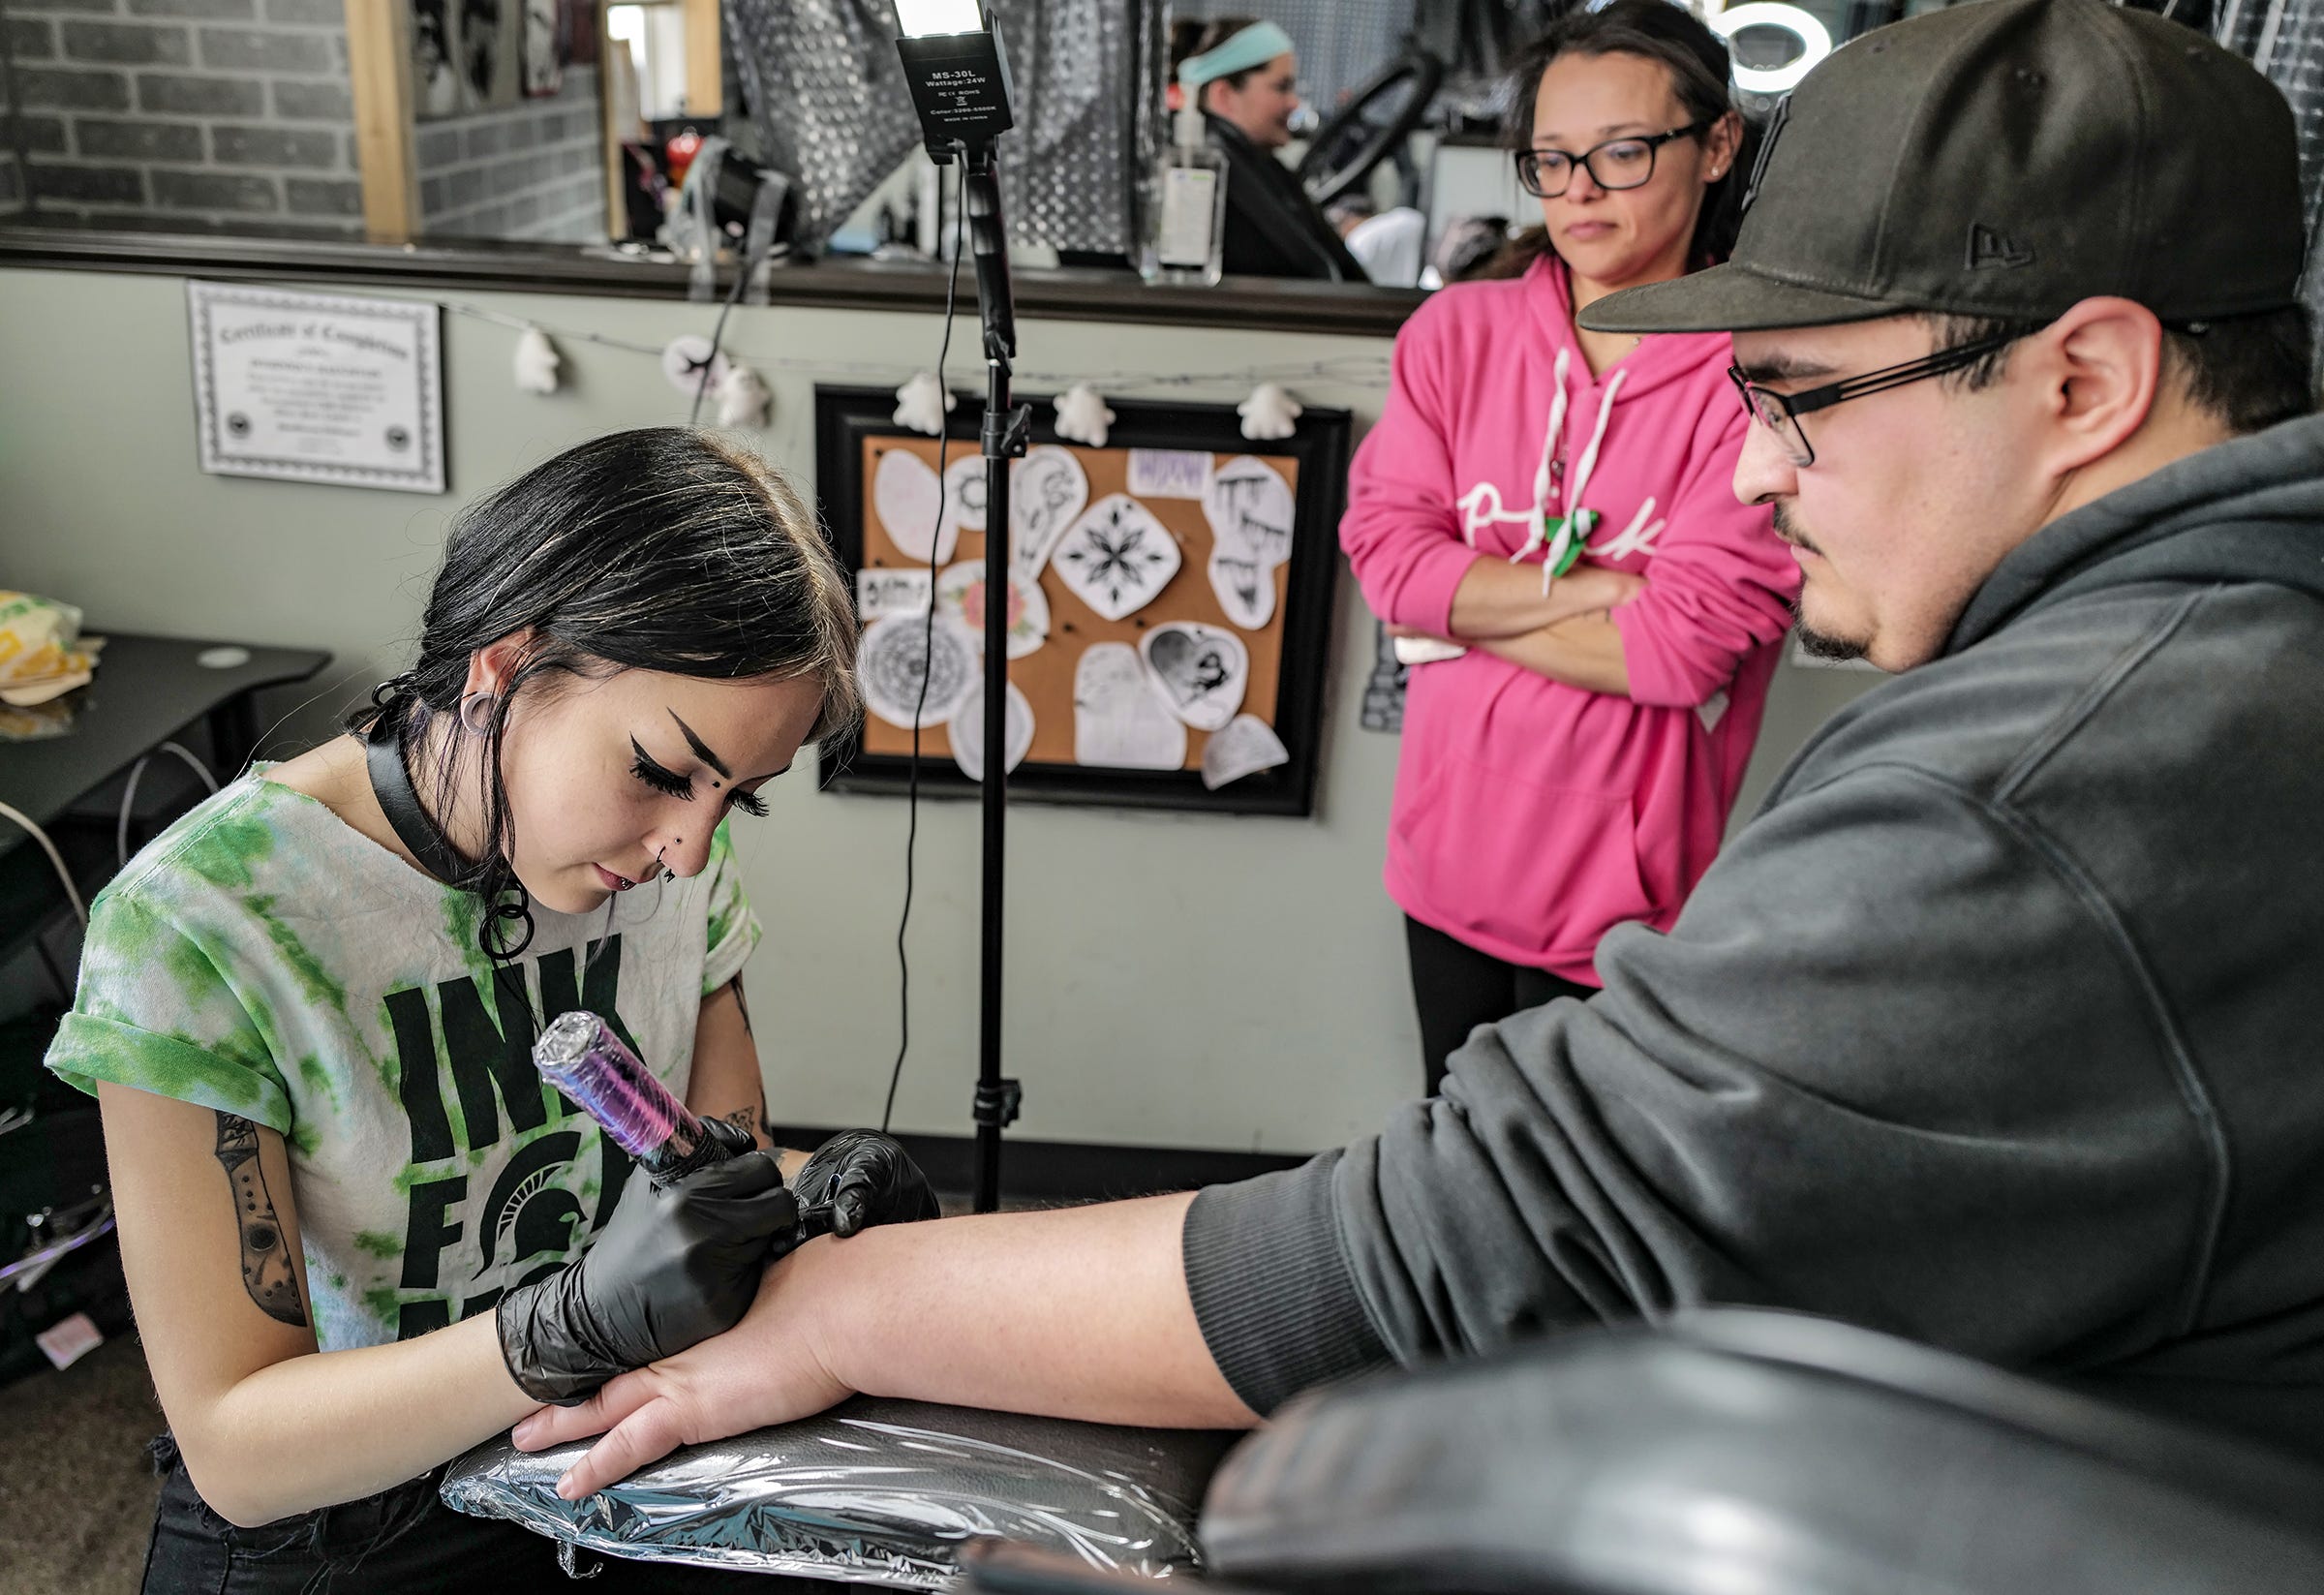 A look at the finalists from Michigans Coolest Tattoo Shop  mlivecom